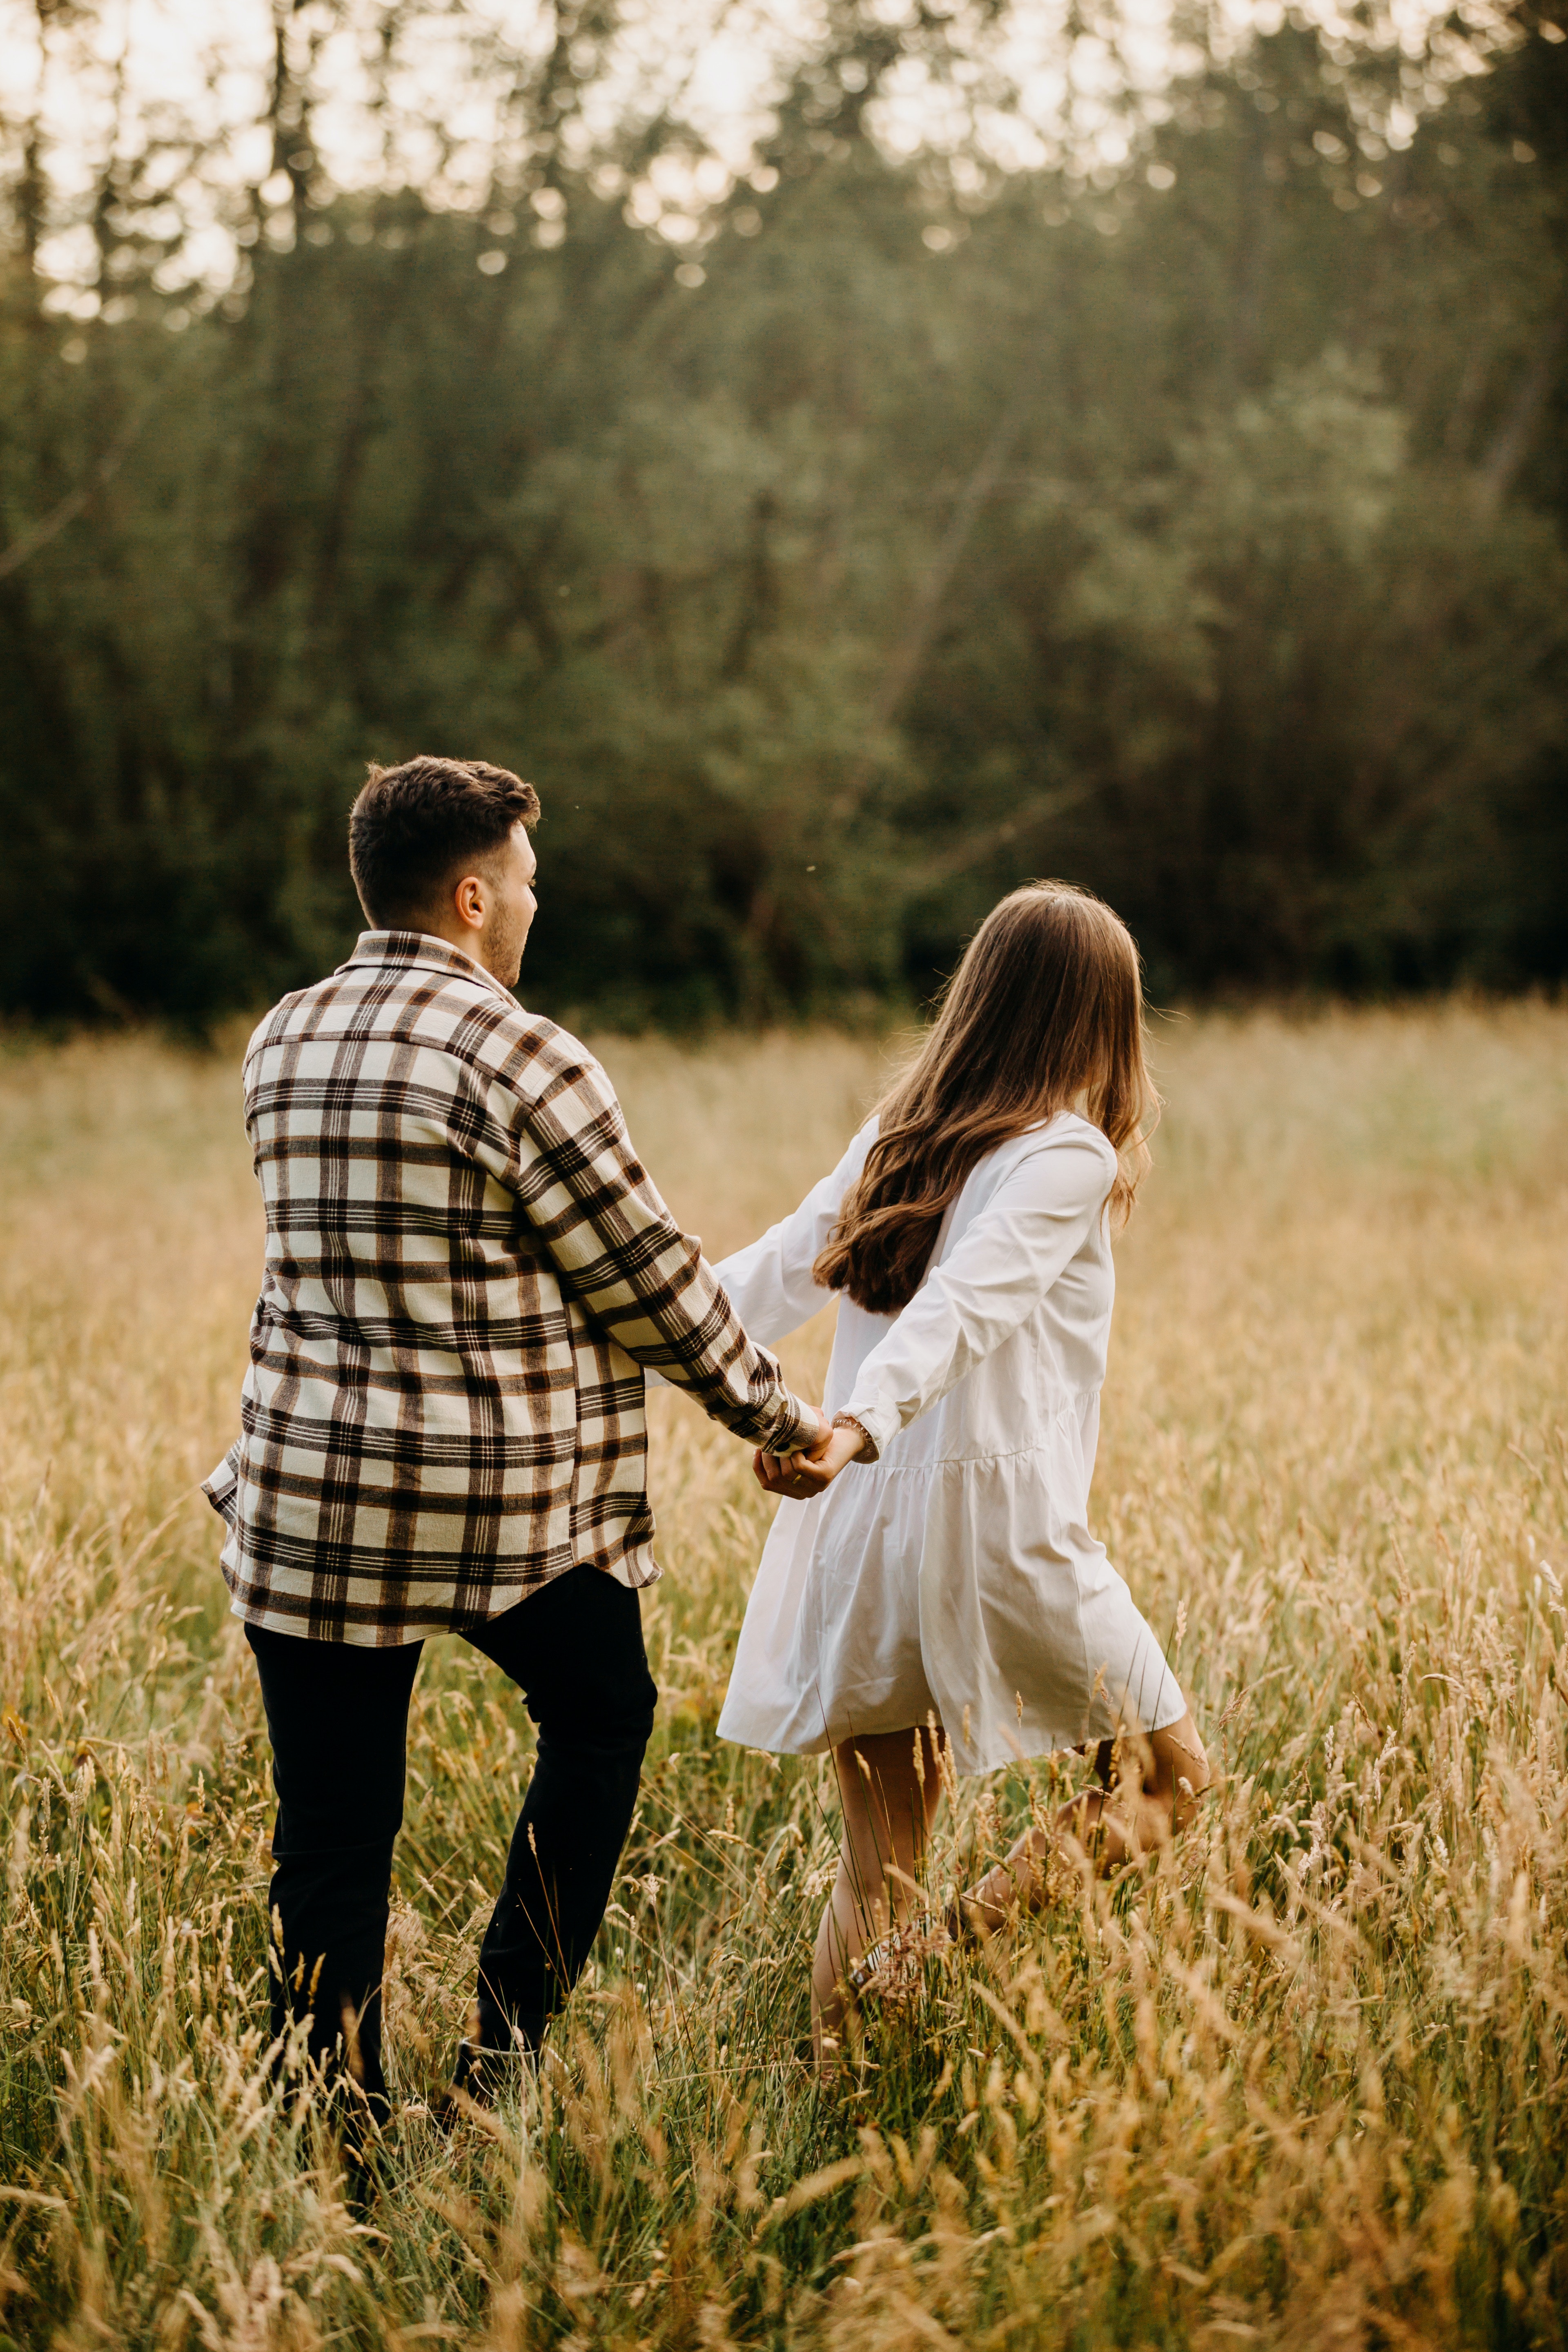 Couple Holding Hands and Running on Field. | Source: Pexels